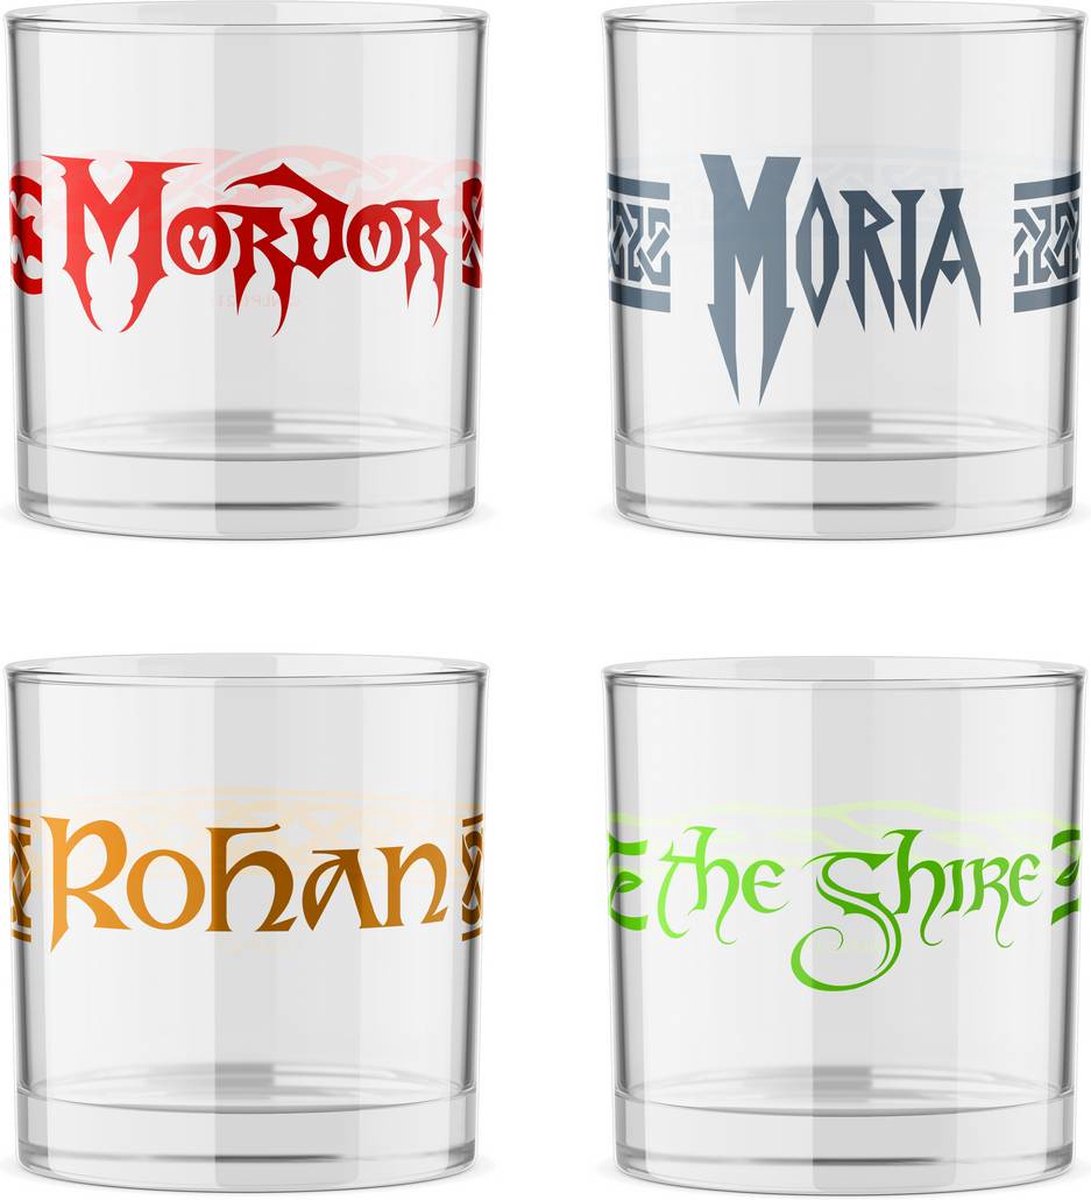 Lord of the Rings Set of 4 Shot Glasses